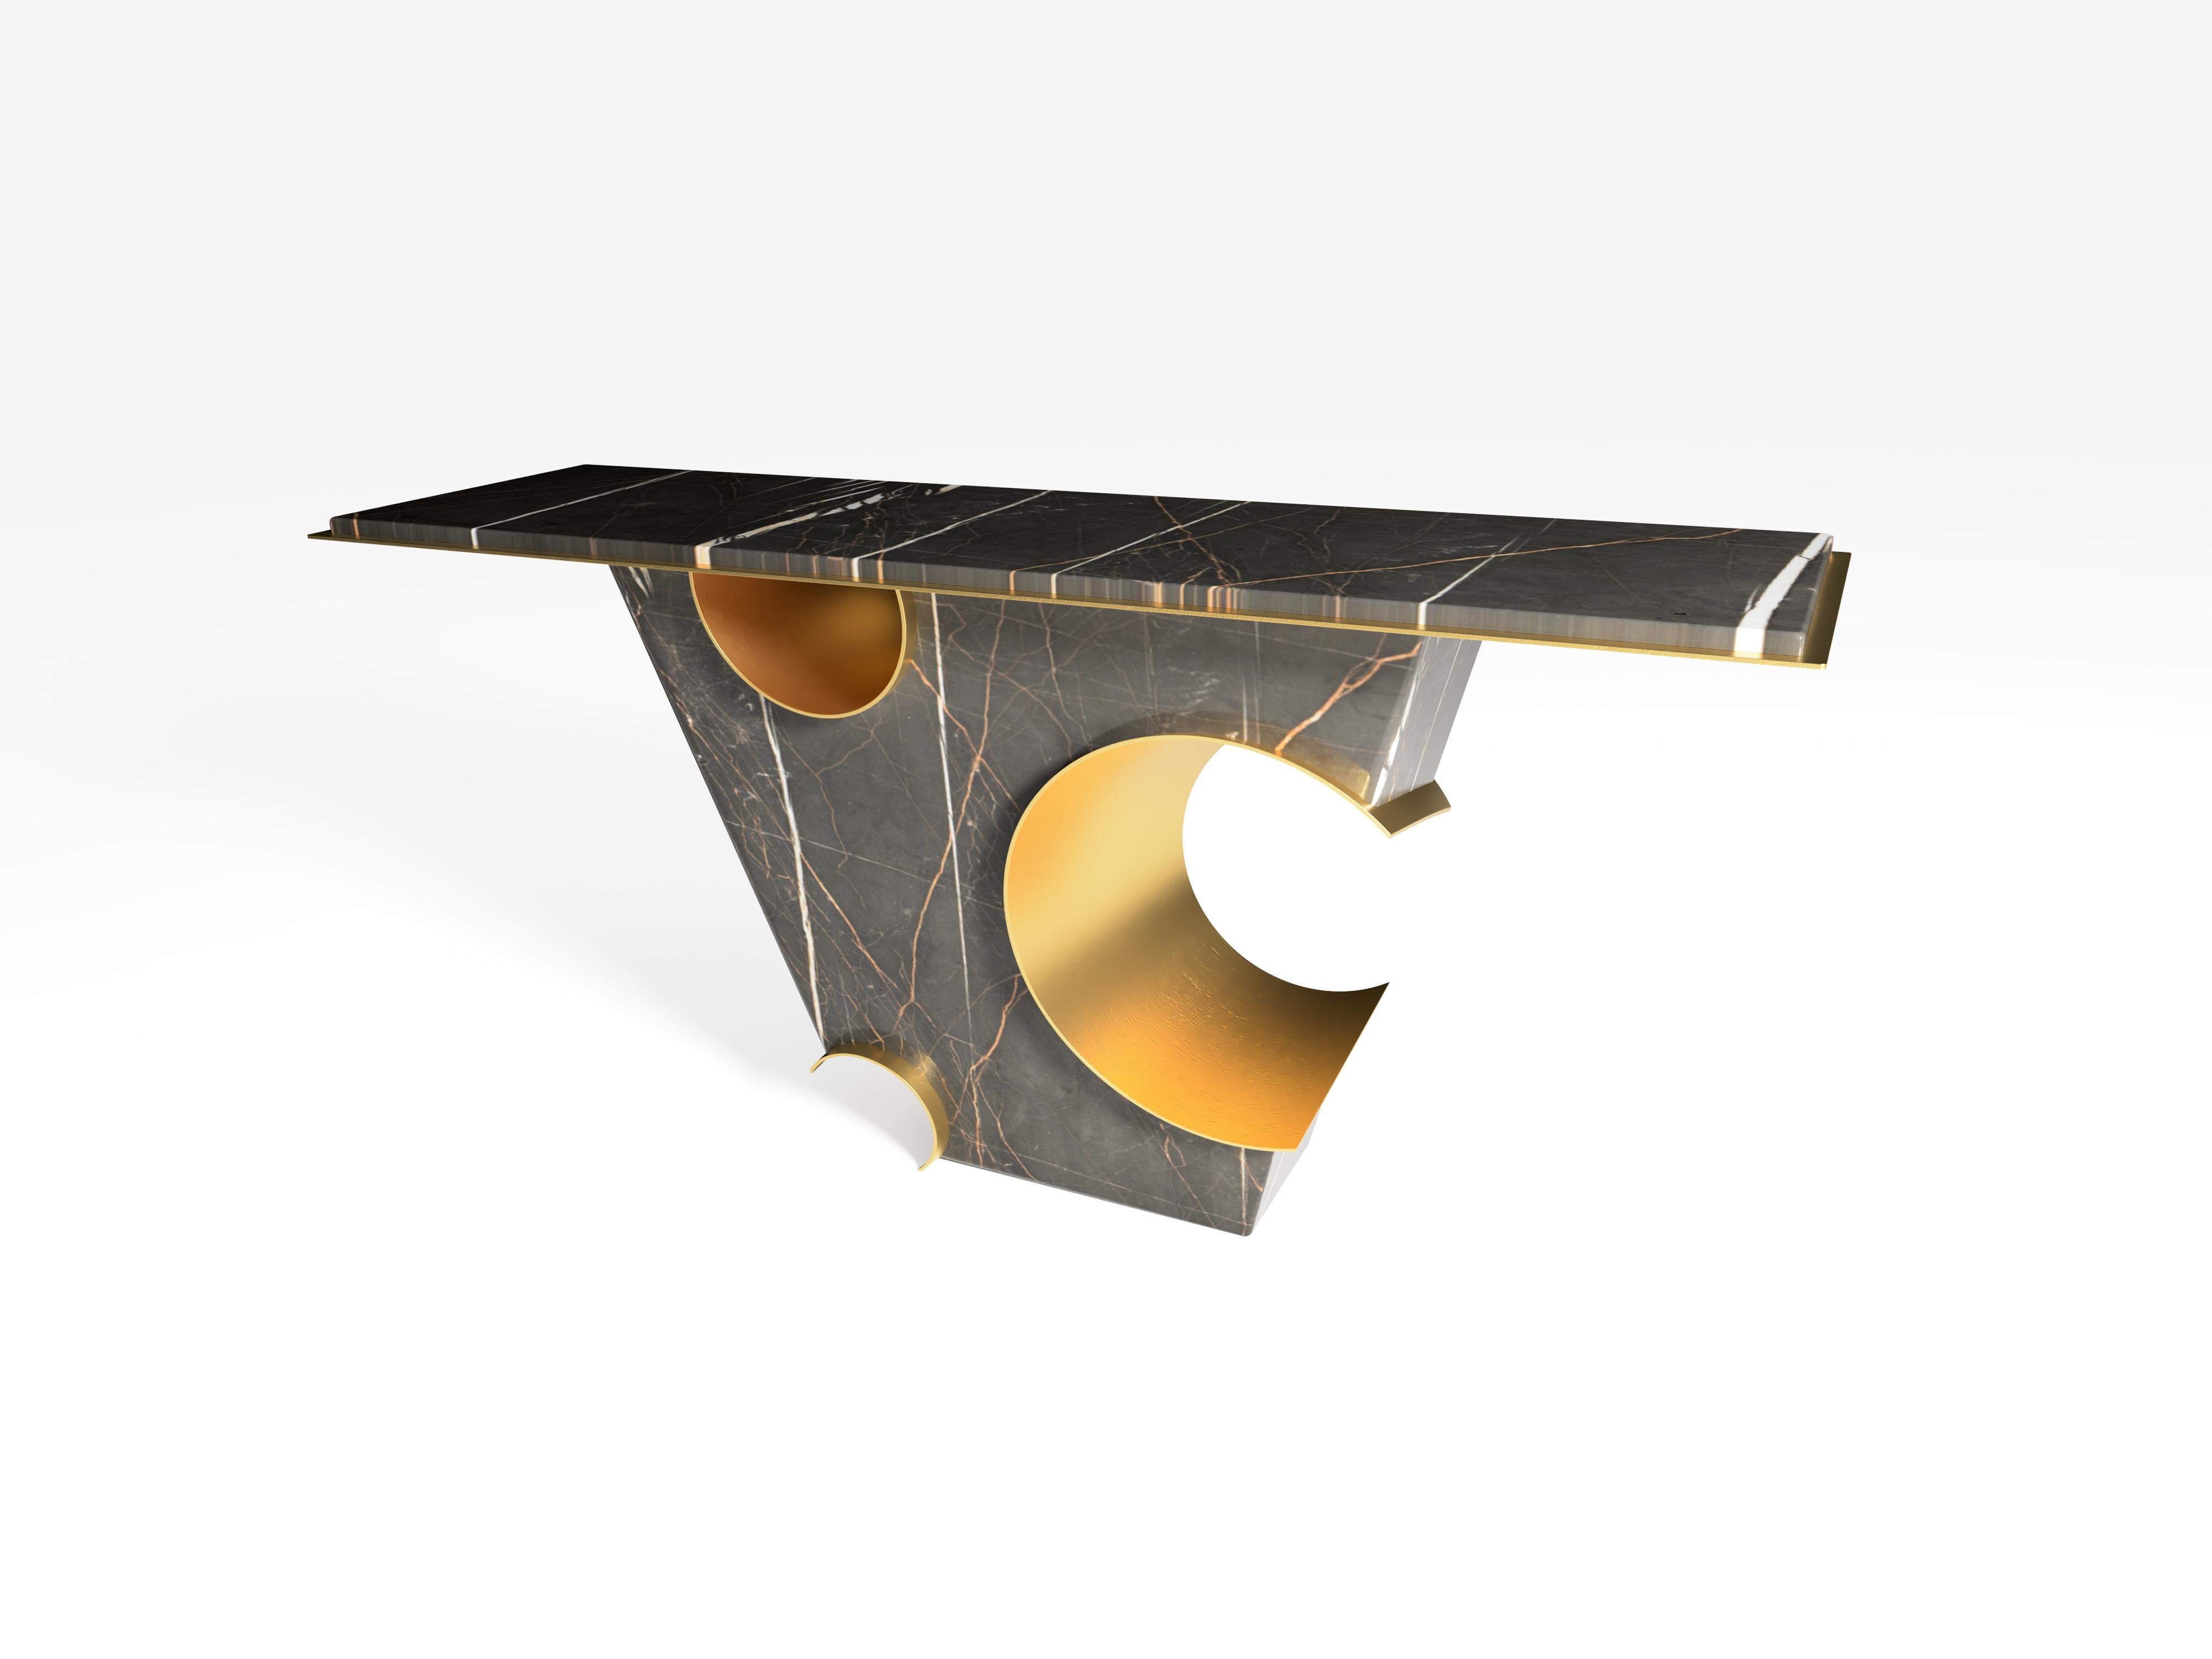 The Galactic console table, 1 of 1 by Grzegorz Majka
Edition 1 of 1
Dimensions: 70.87 x 19.69 x 37.40 in
Materials: Marble. Brass details. 


This piece of work allows us to leave our everyday problems and go on a much further journey. Almost